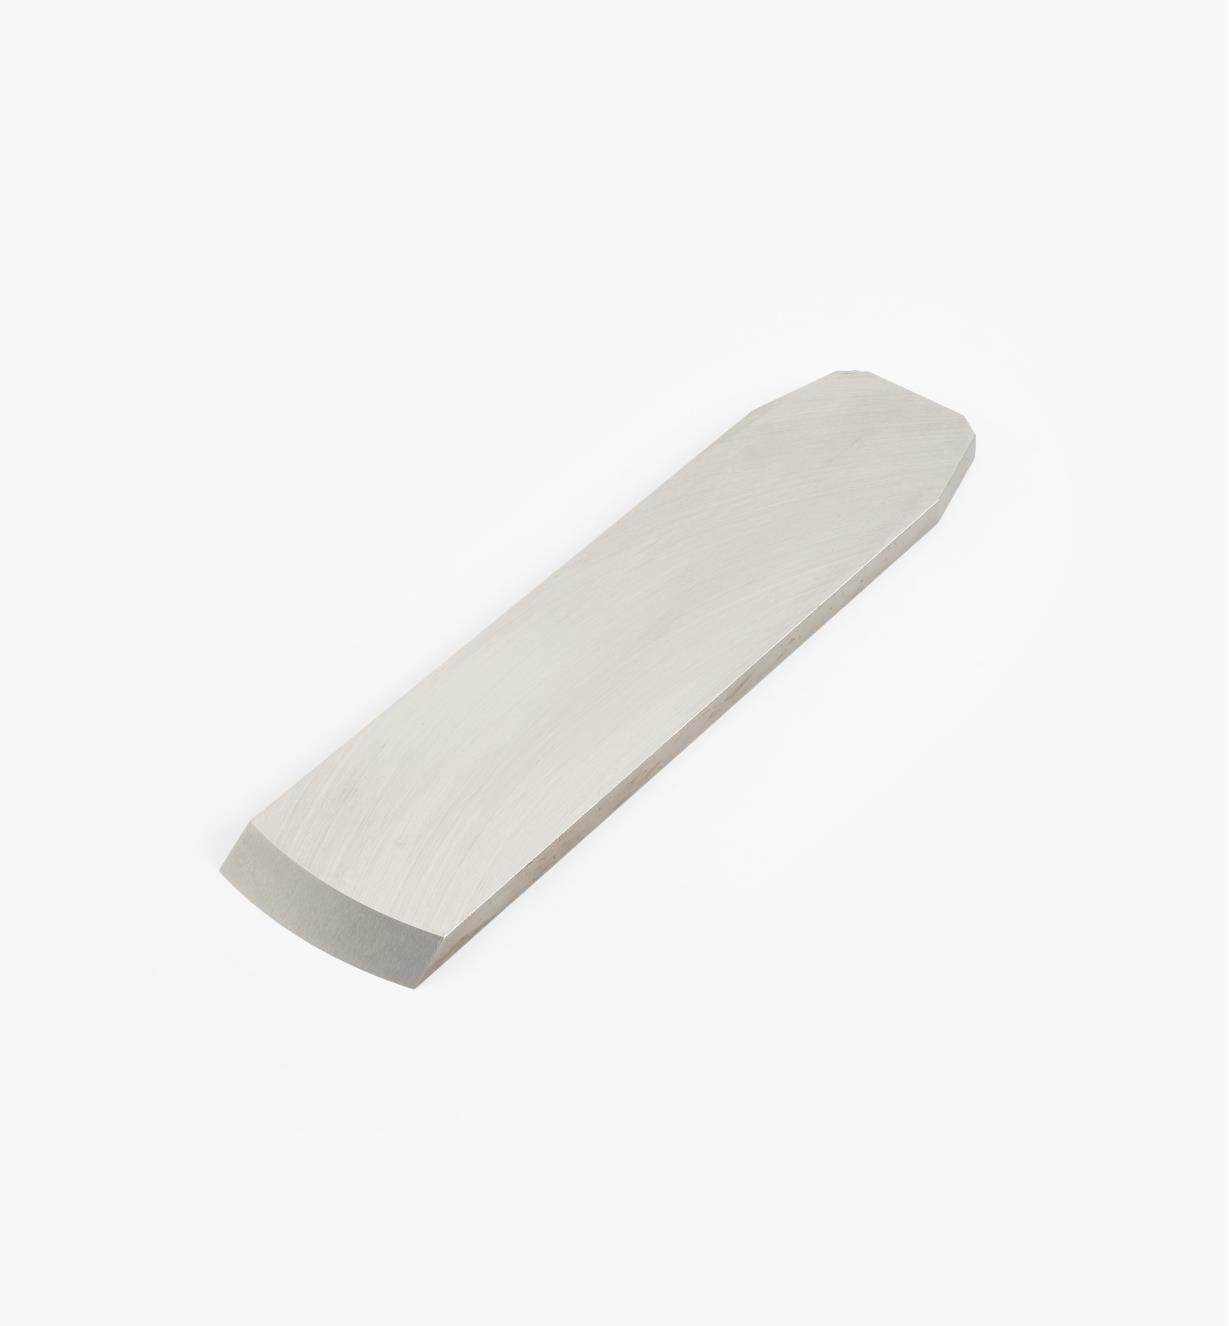 05P3574 - Replacement PM-V11 Blade